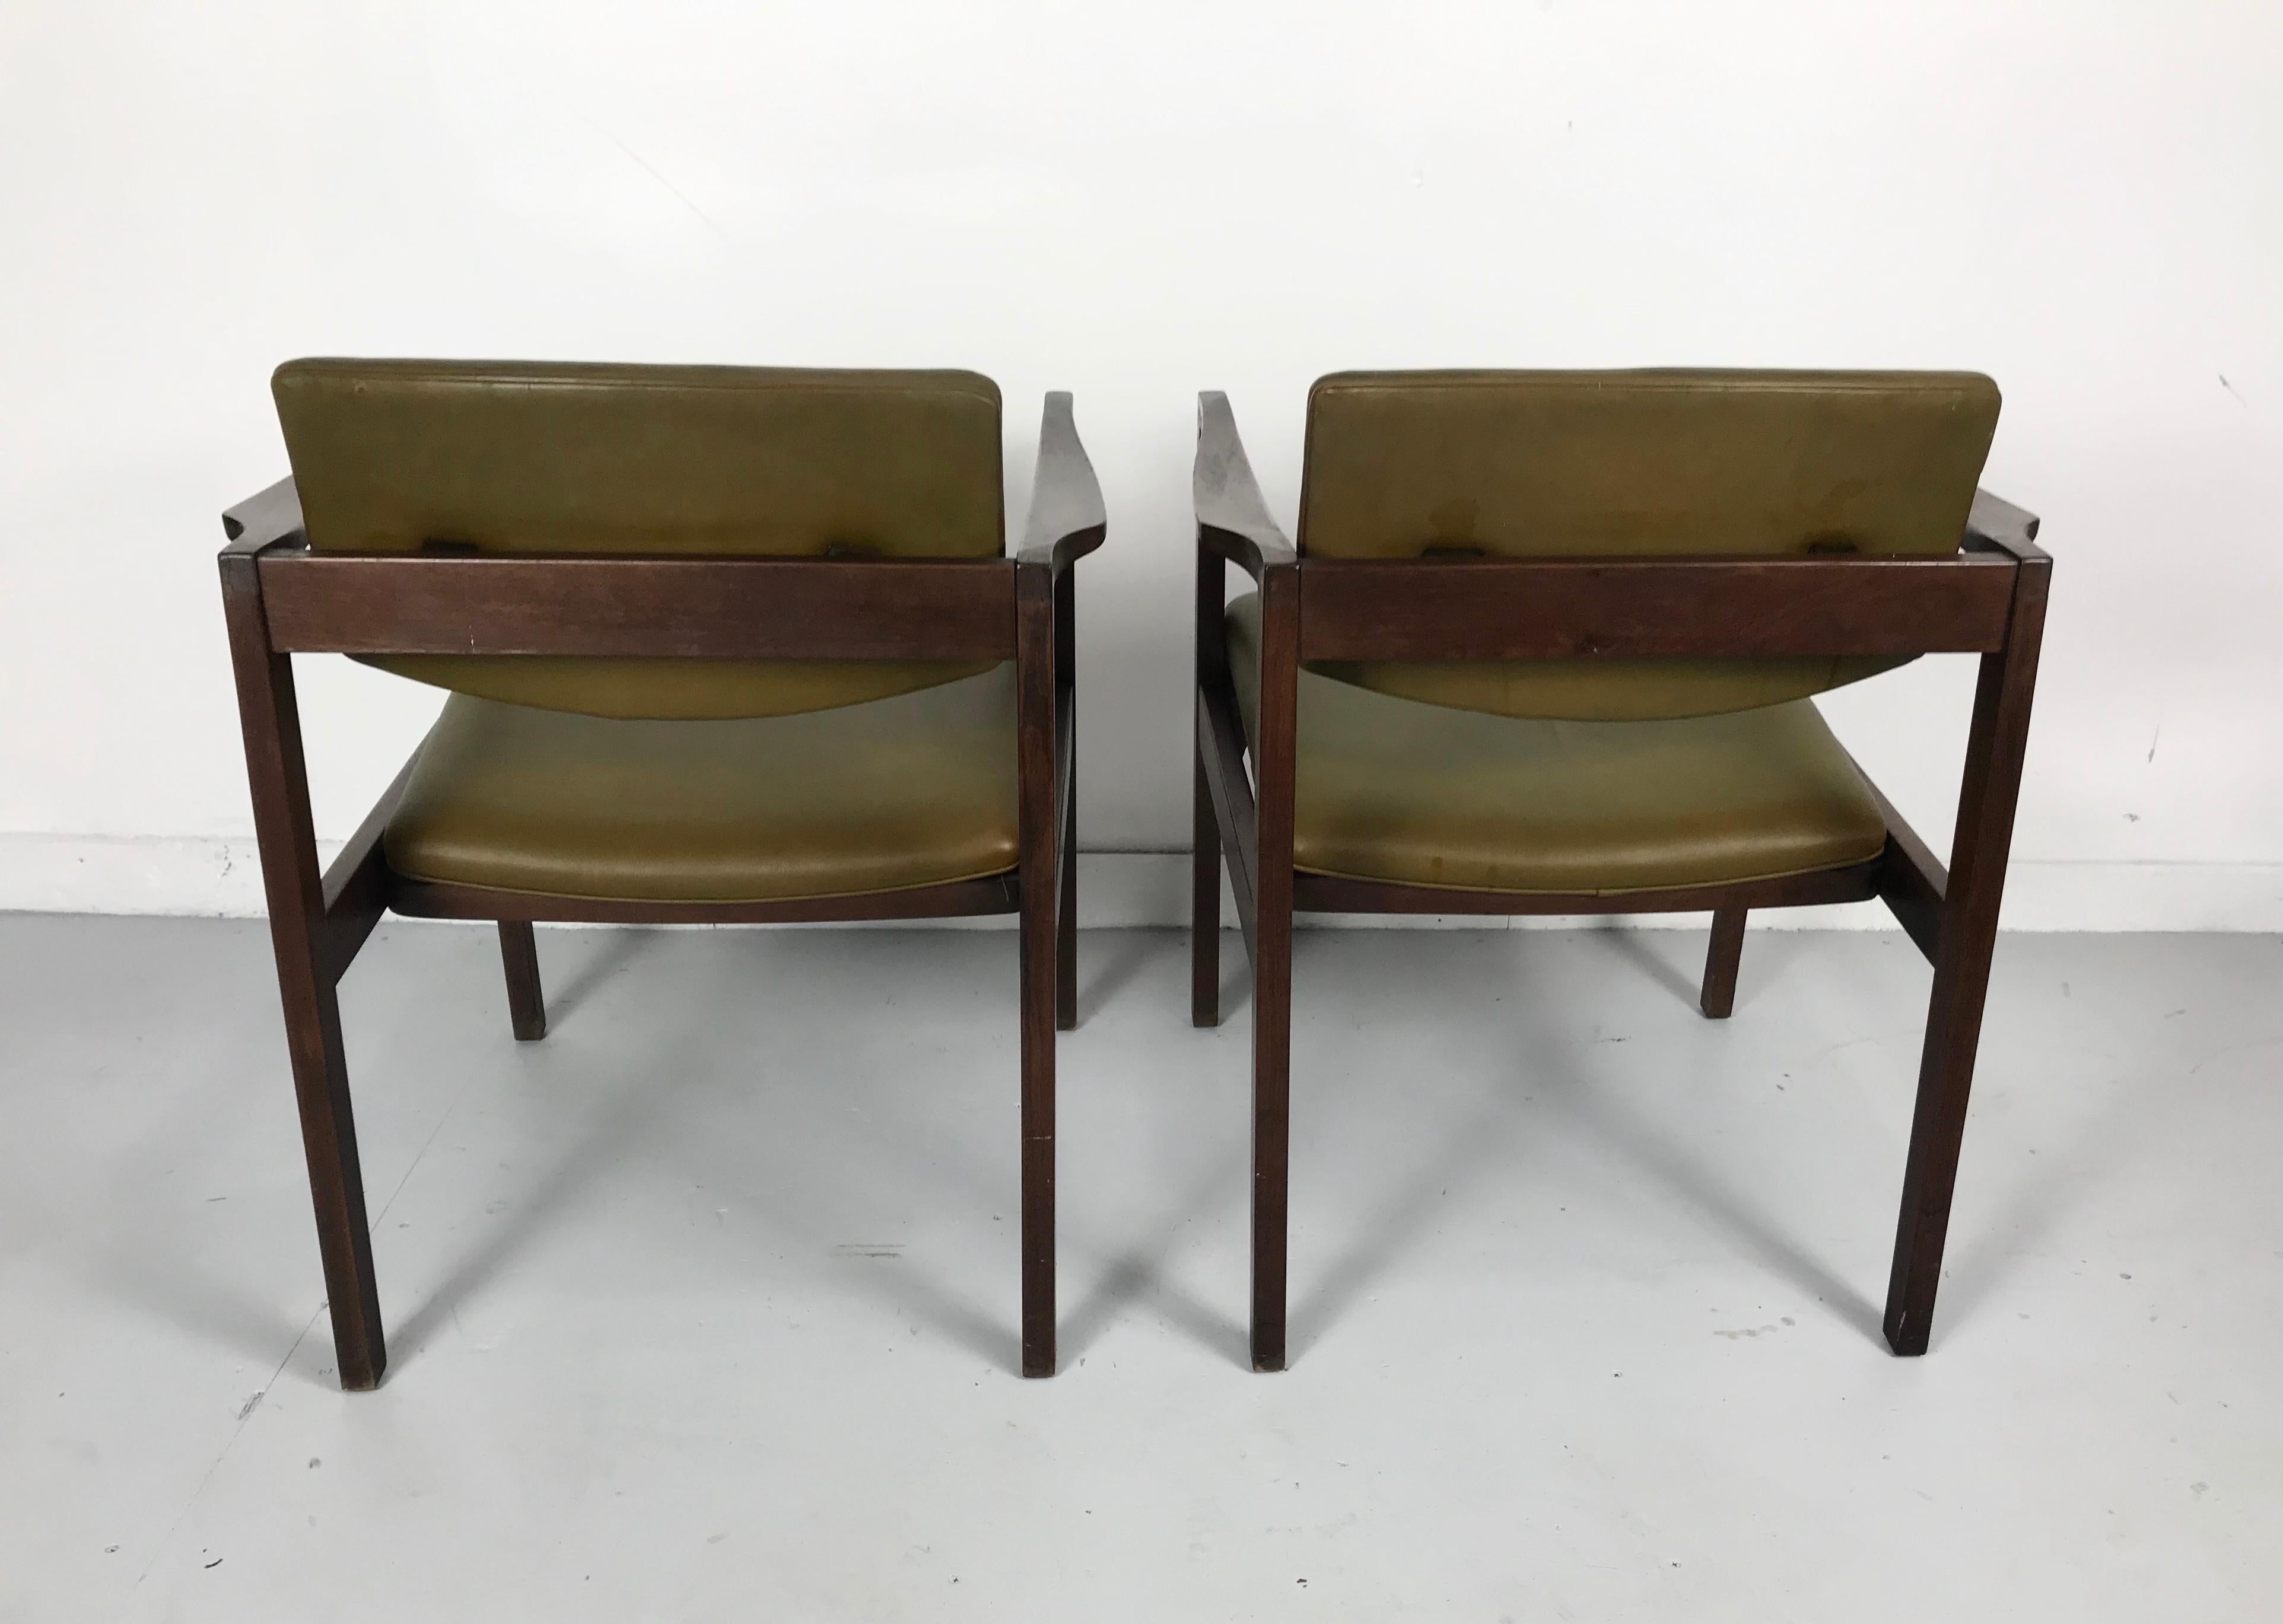 Stunning Pair of Stow Davis Walnut Lounge Chairs, Classic Modernist Design In Good Condition For Sale In Buffalo, NY